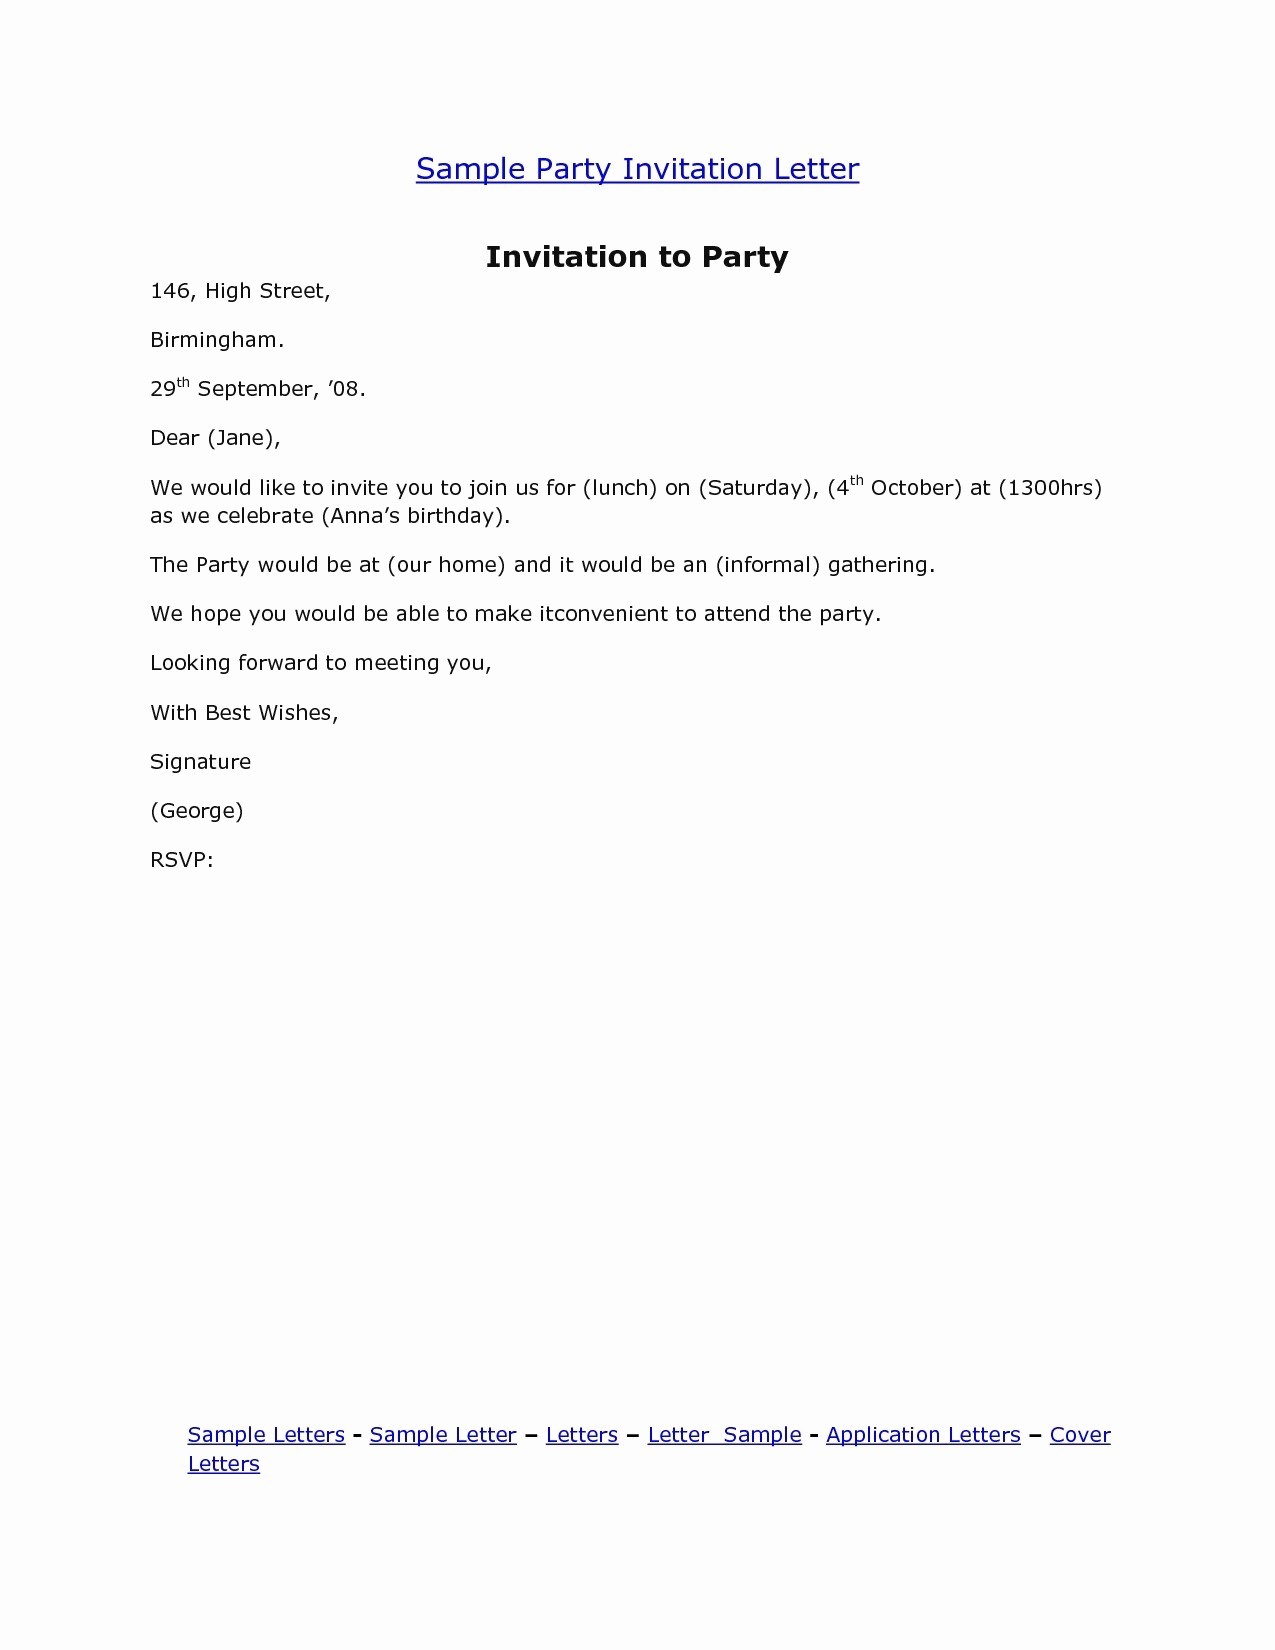 Lunch Party Invitation Email Sample Wedding Invitations Cute Document Samples